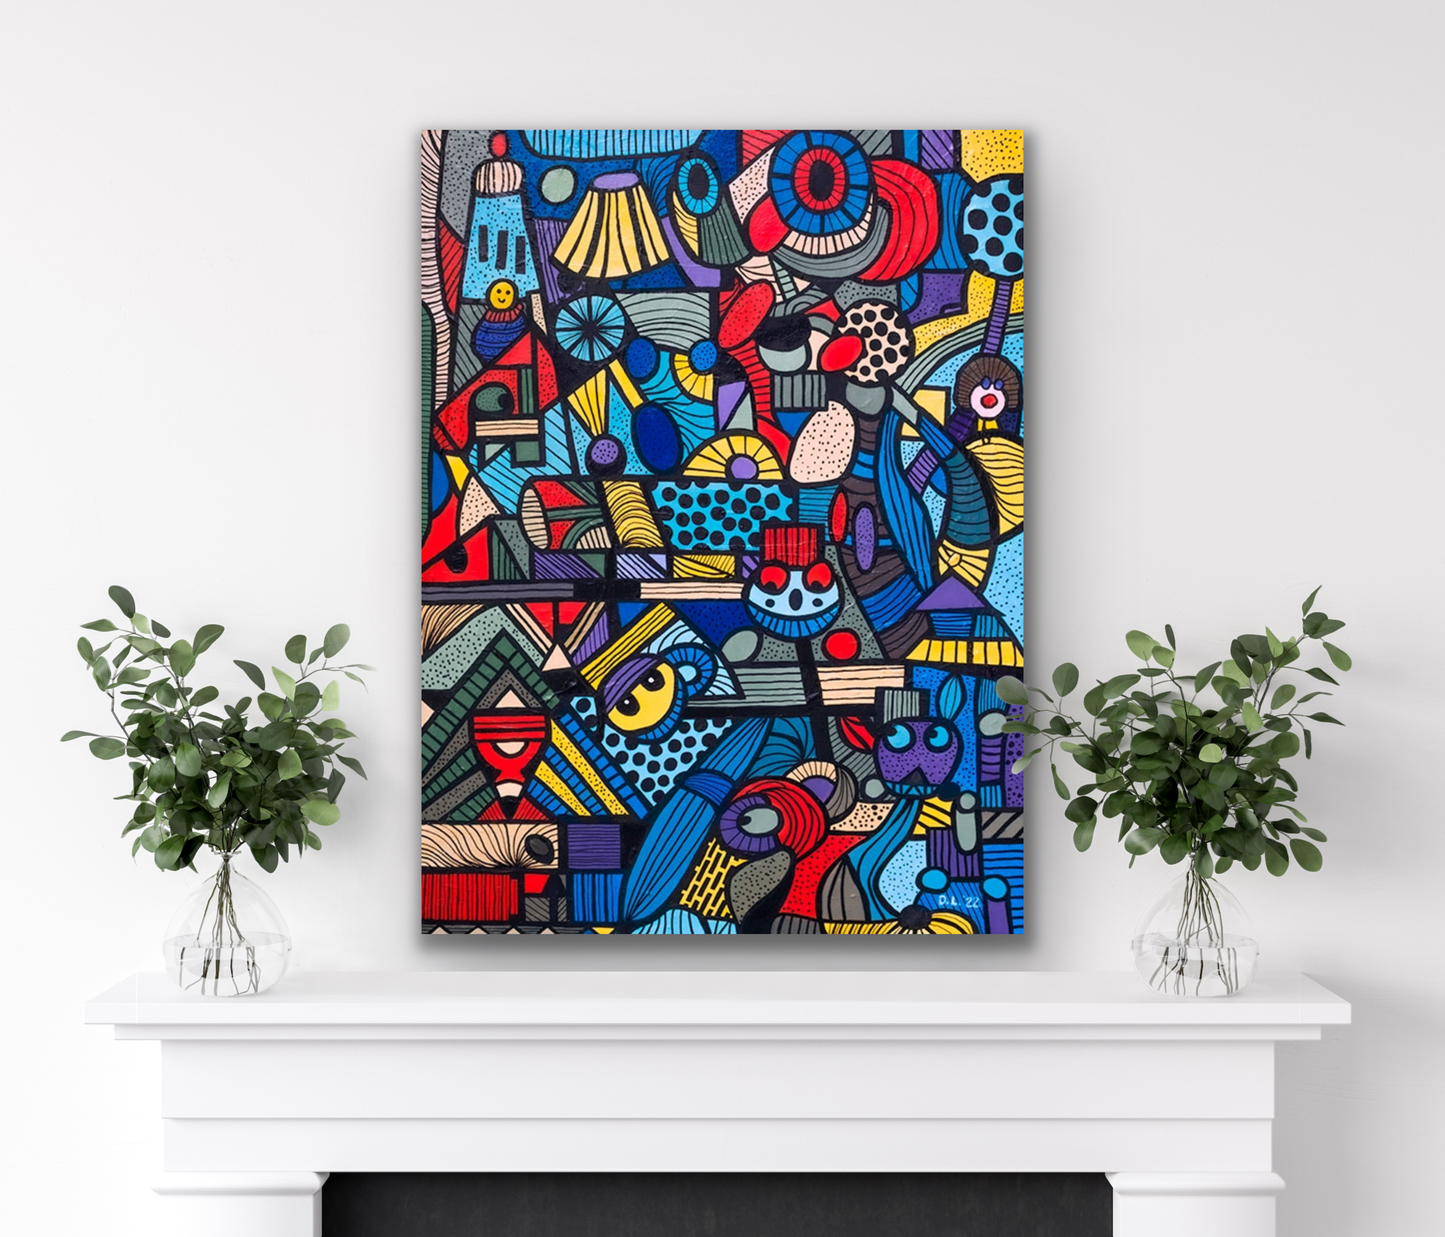 "Mrs. Lighthouse" artwork is a blast of colours and fun that will liven up any room you choose to place it in.